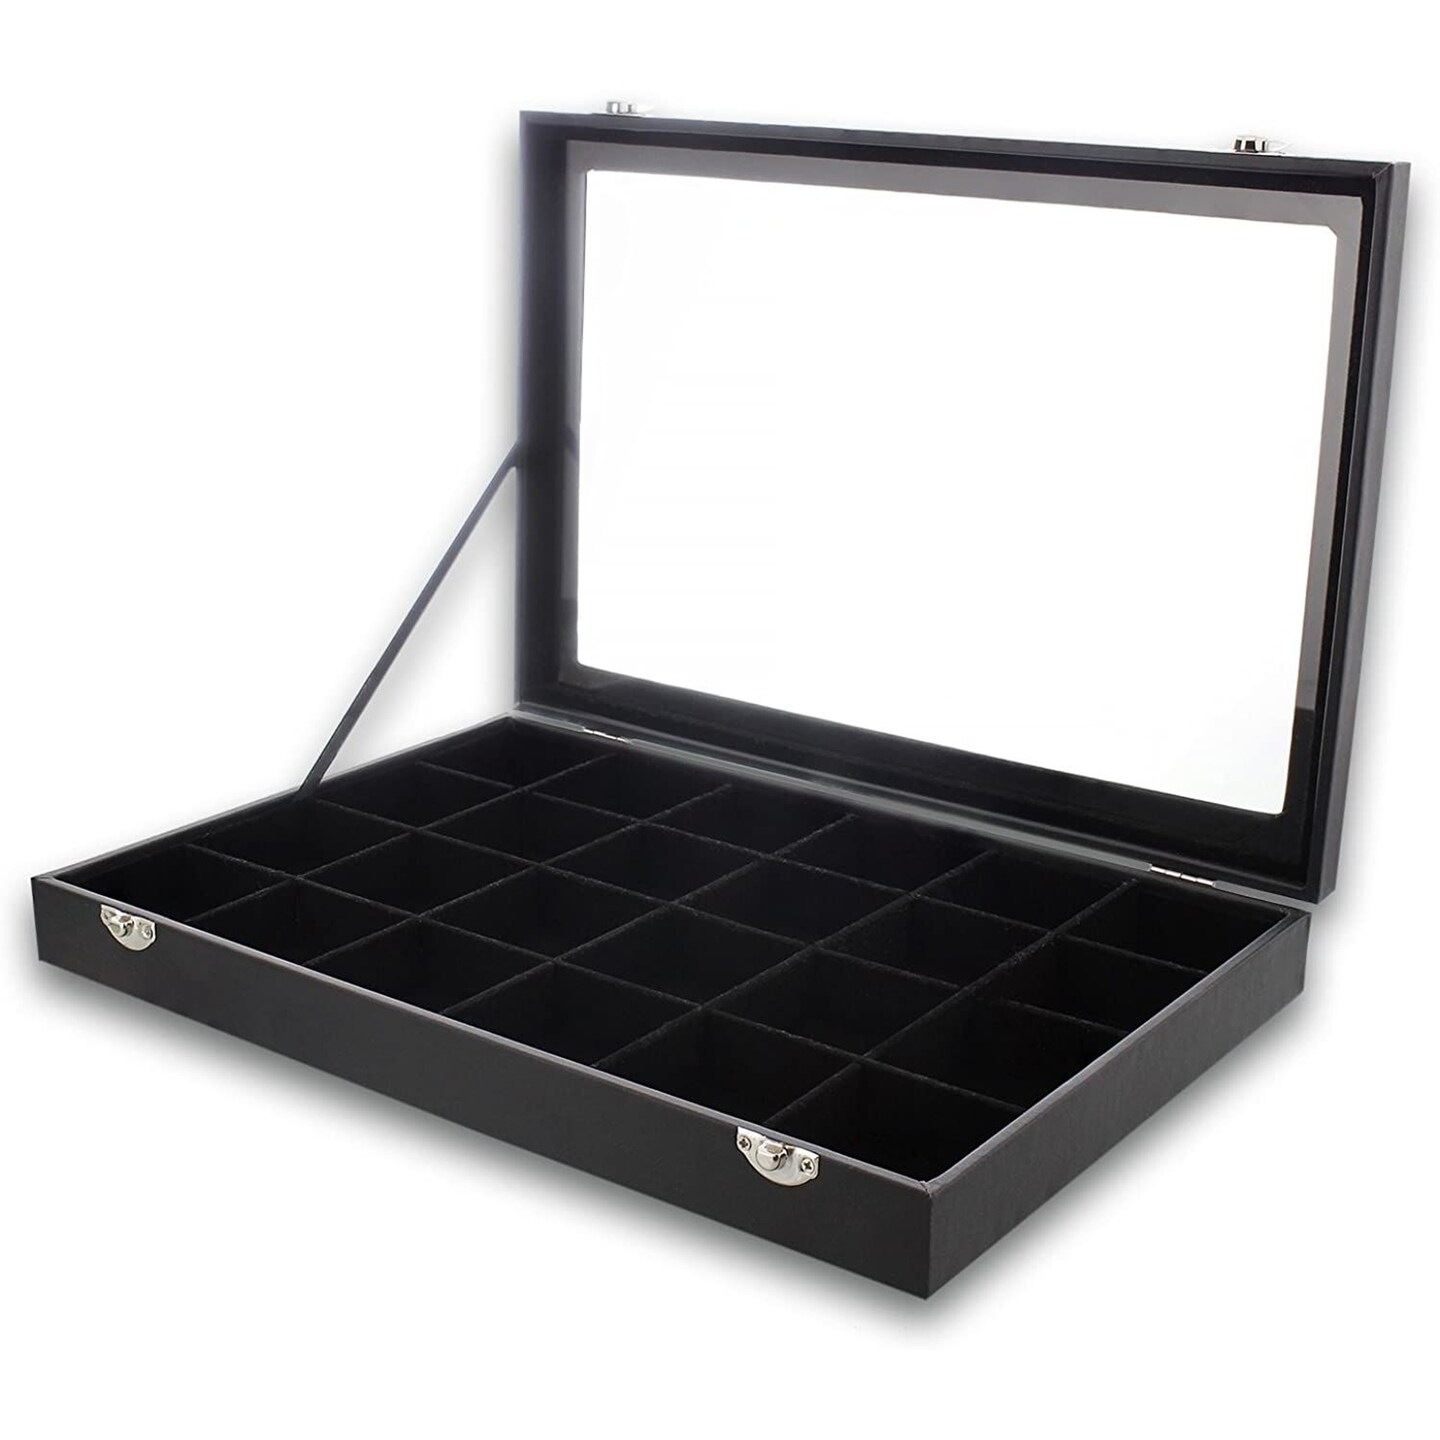 Black Jewelry Display Tray with Velvet Lining for Gemstones, Rocks (24 Slots, 14 x 9.5 x 2 In)